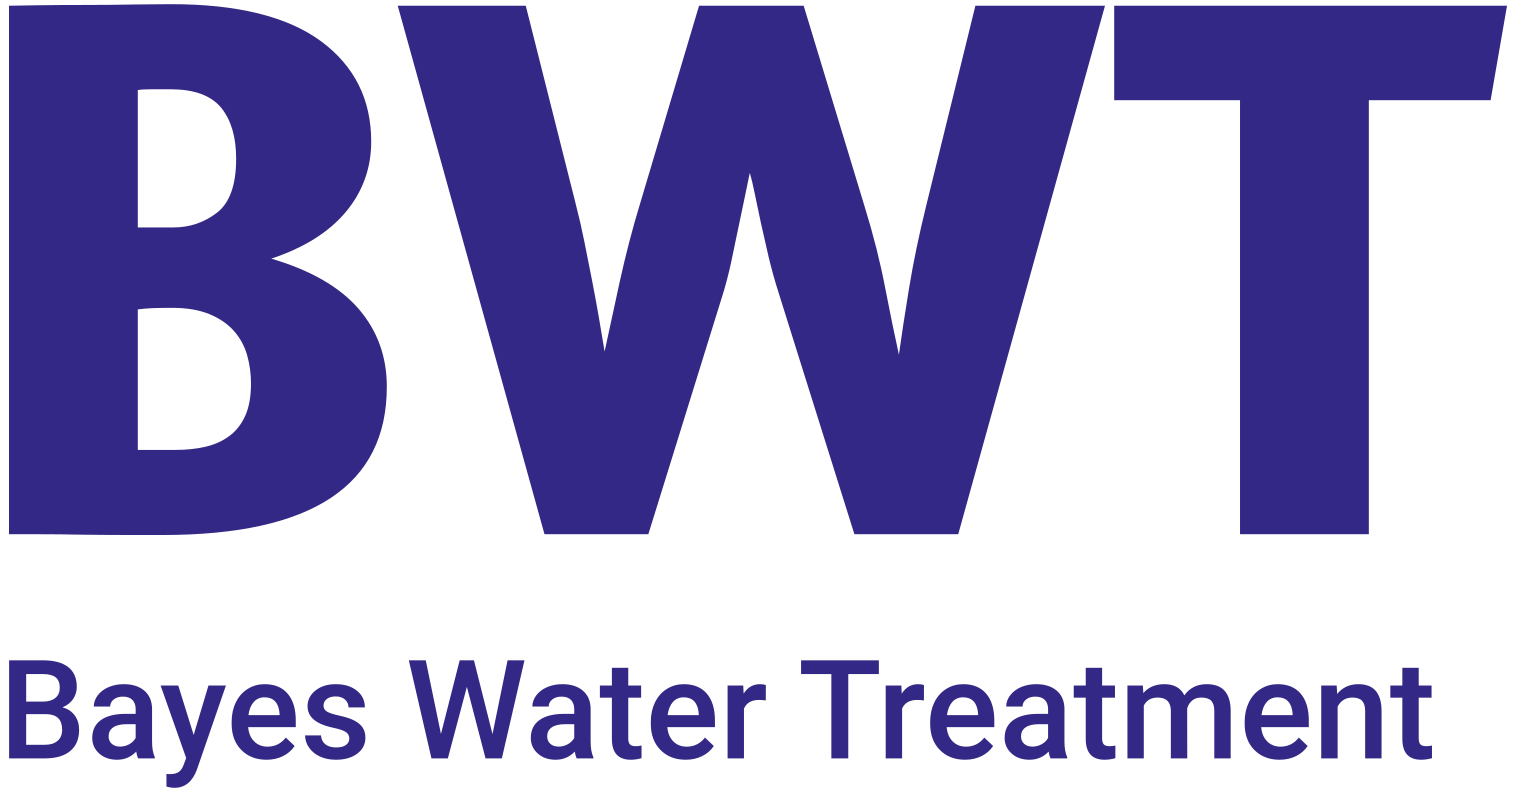 Bayes Water Treatment